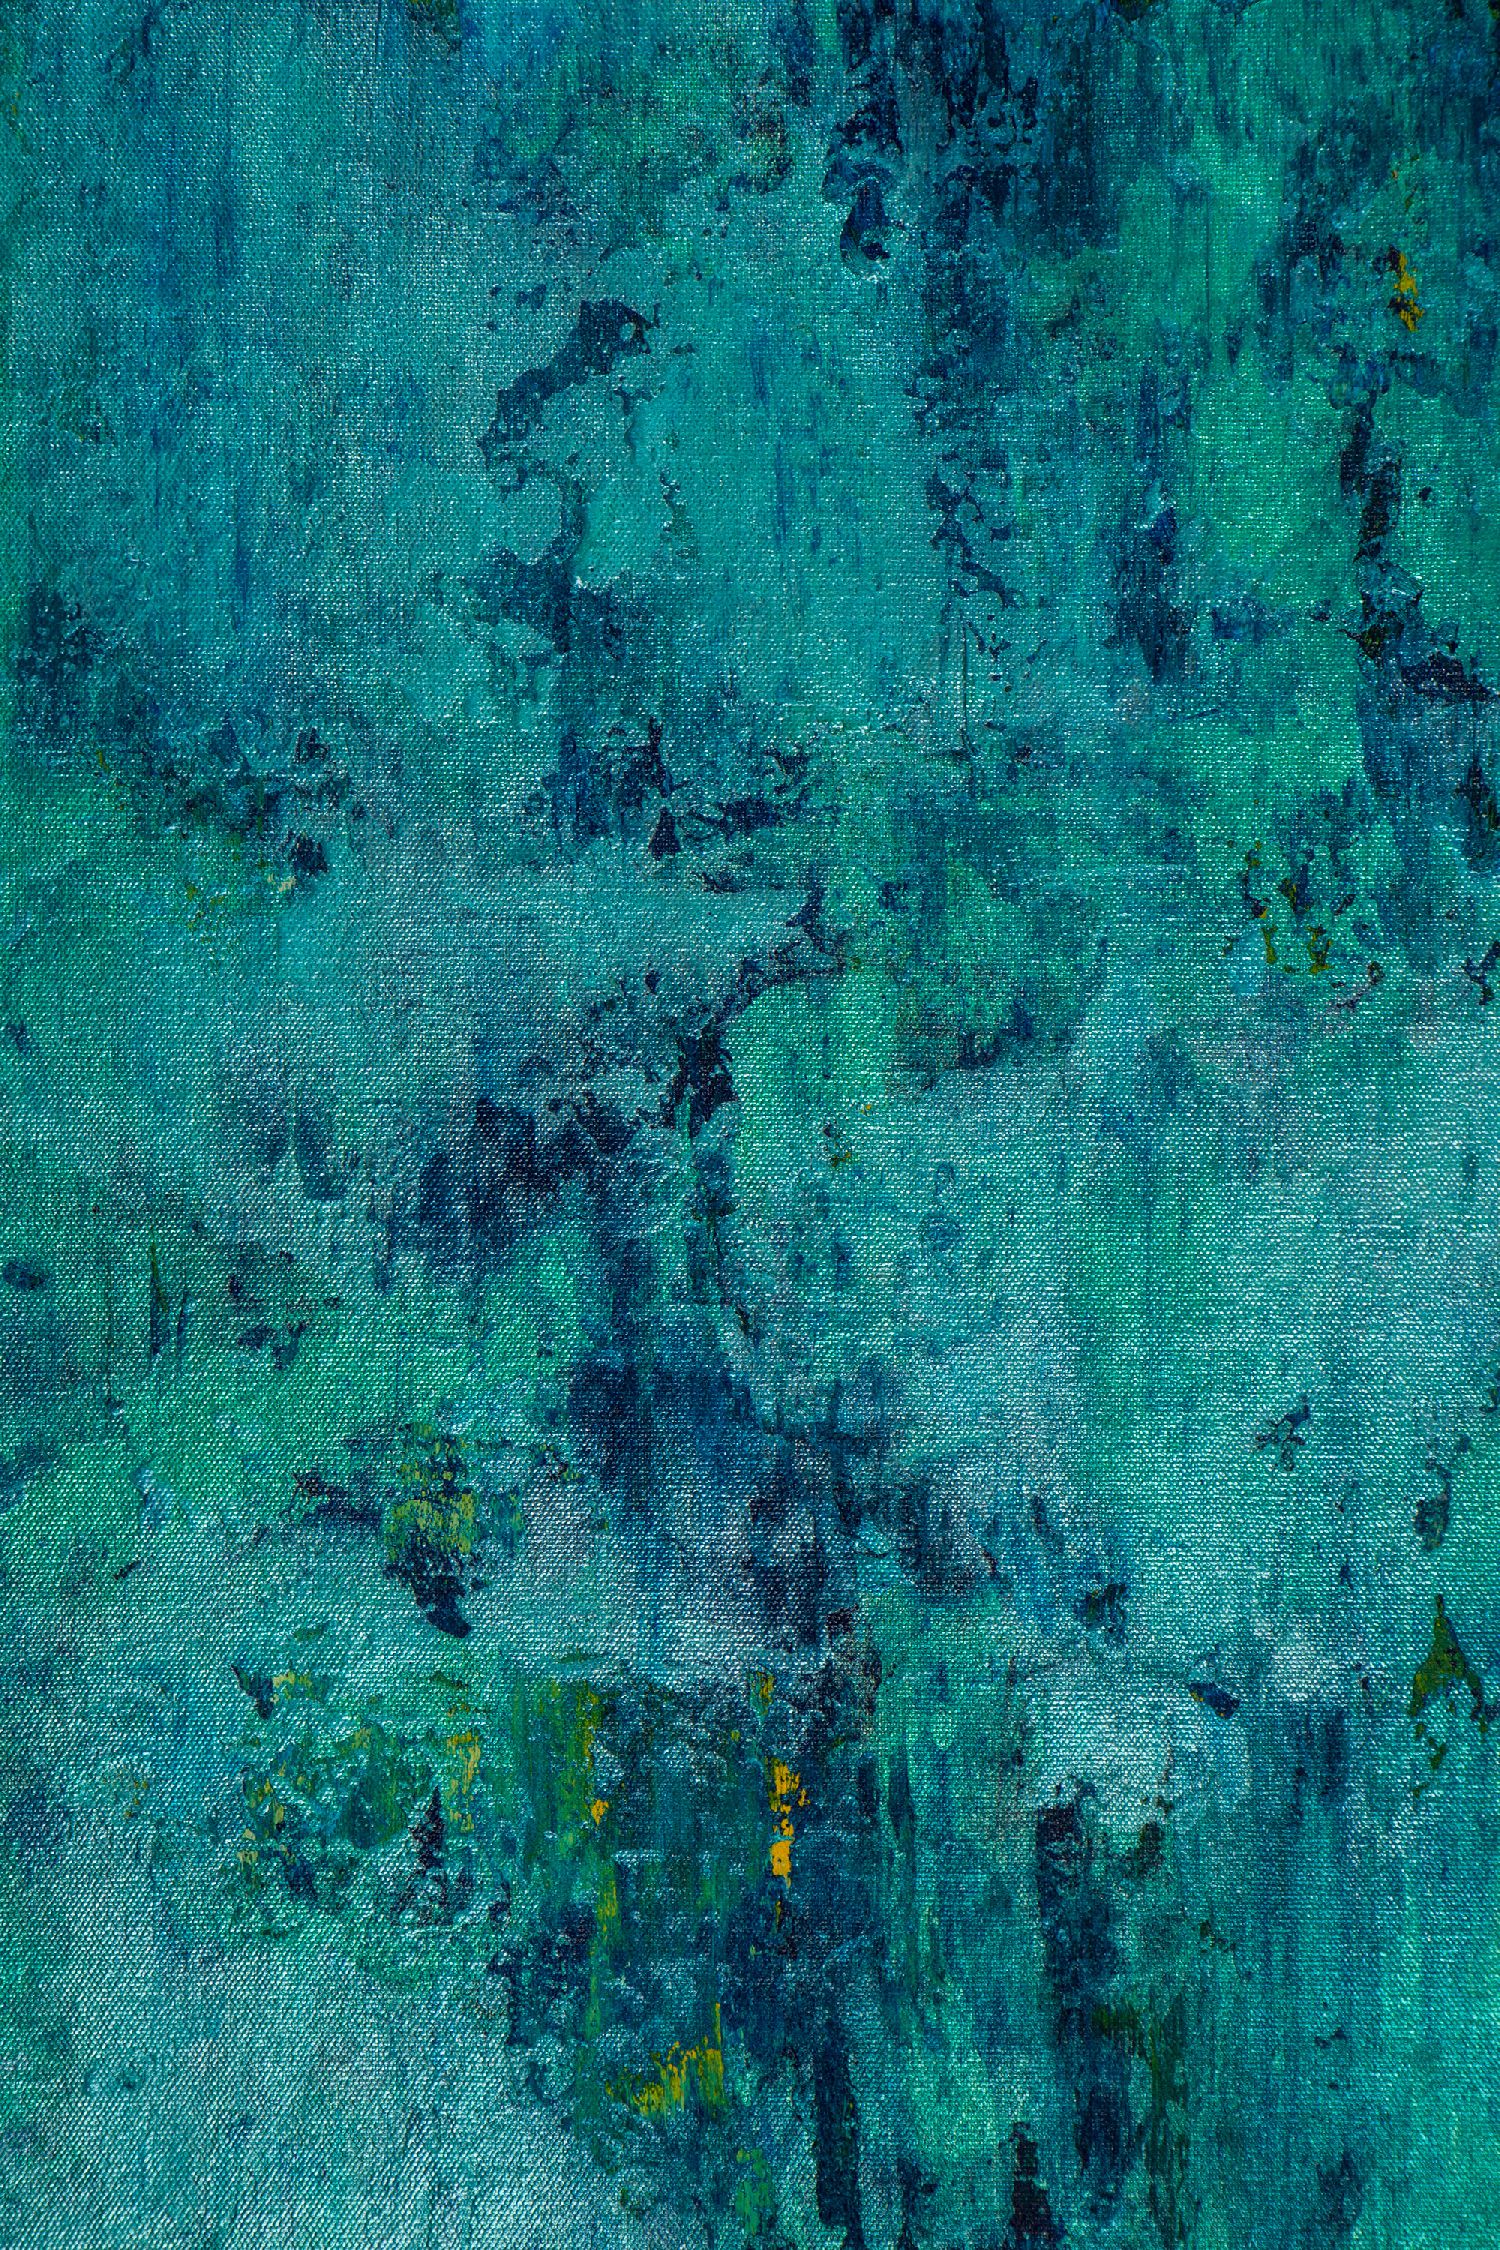 Detail / The Deepest Ocean (Turquoise spectra) (2020) by Nestor Toro